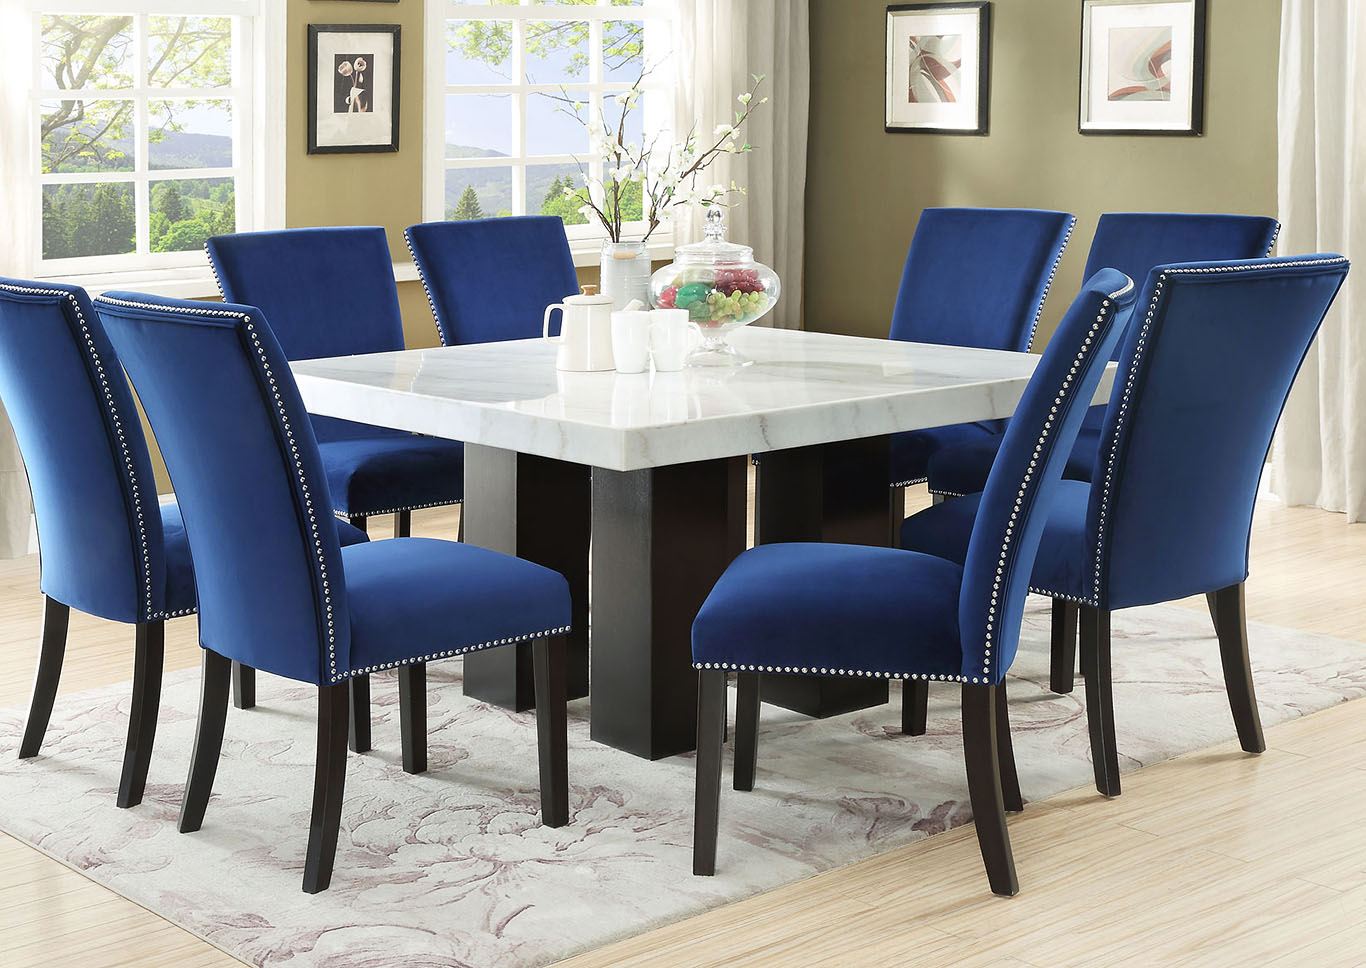 ivan smith dining room chairs